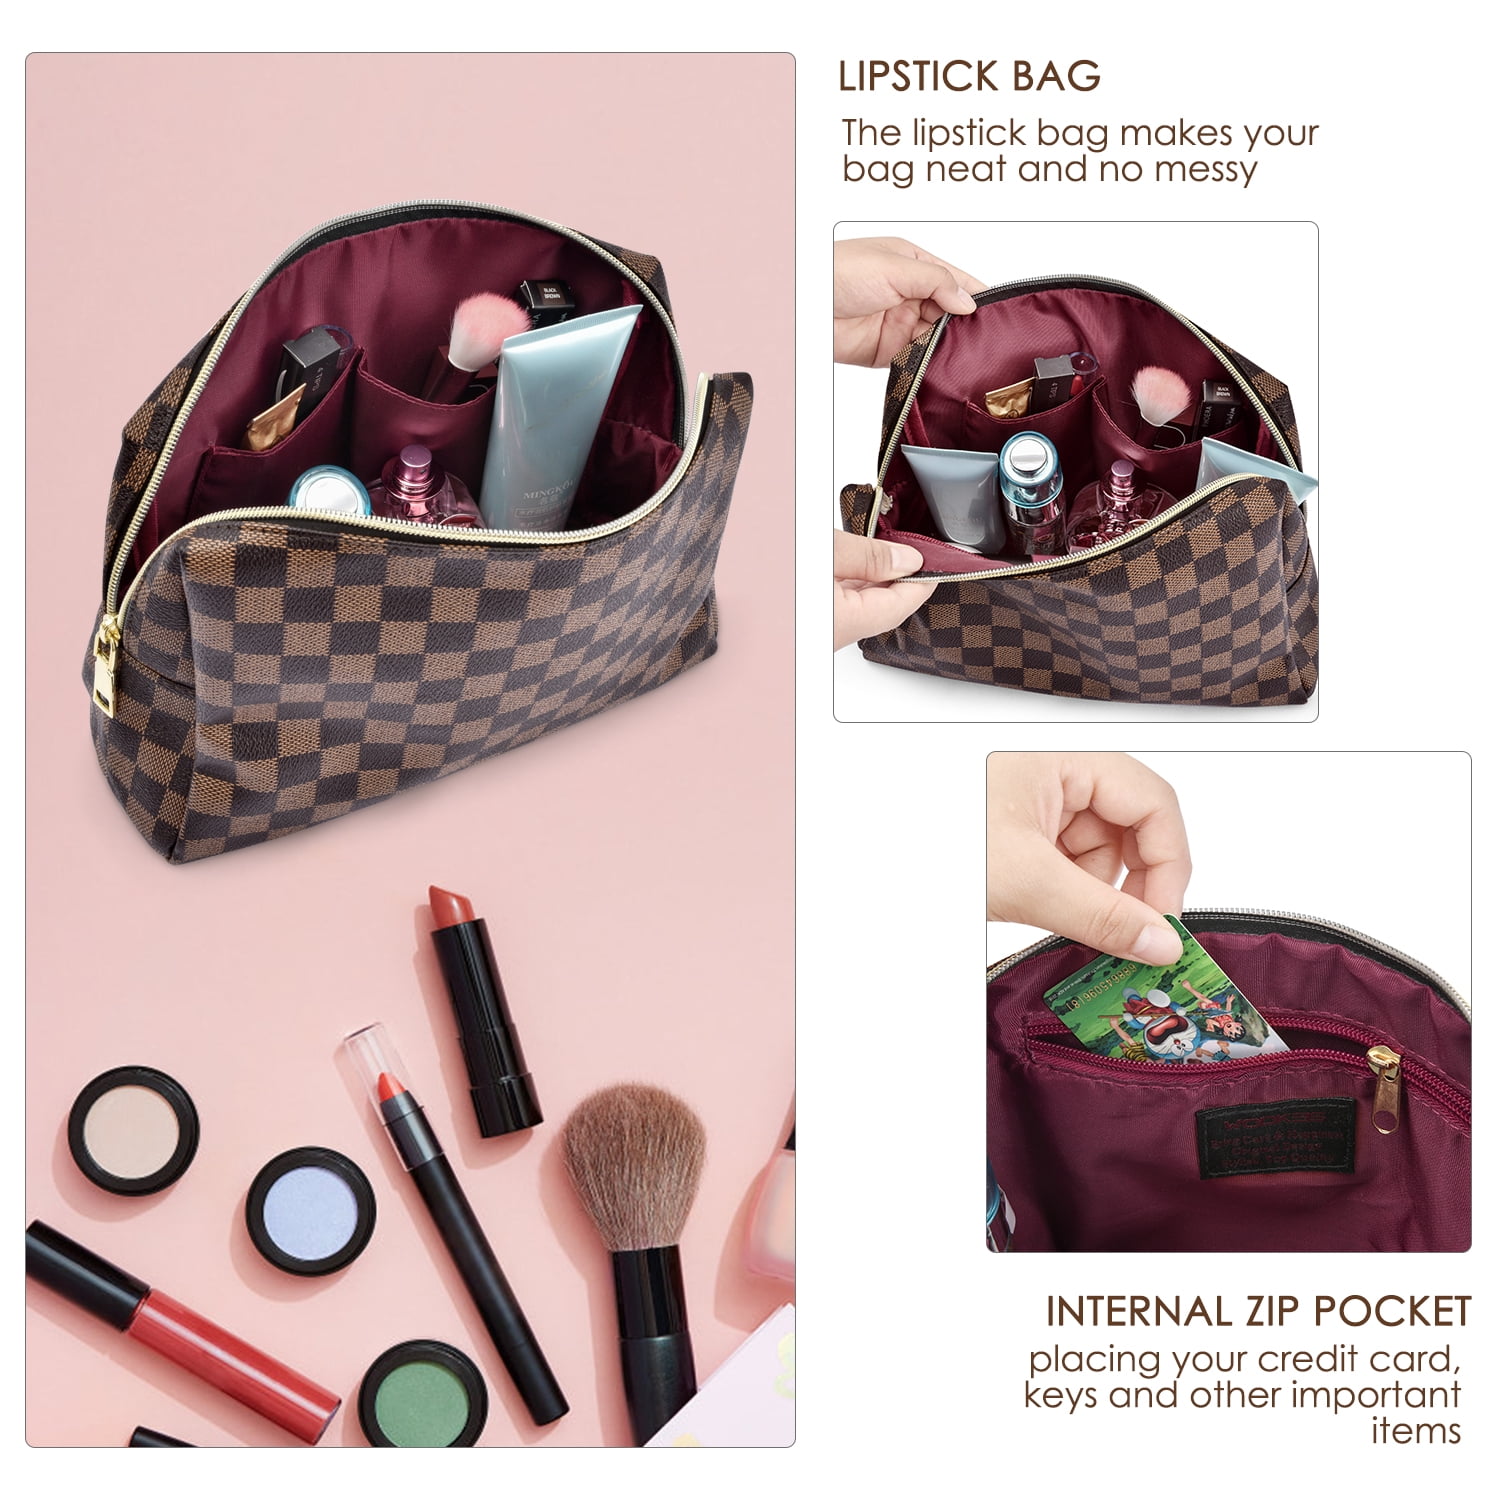 Gogad Checkered Travel Makeup Bag, Vegan Leather Large Retro Cosmetic Pouch, Toiletry Bag for Women, Portable and Waterproof, Brown, Size: Large*W*H=11.8*5*